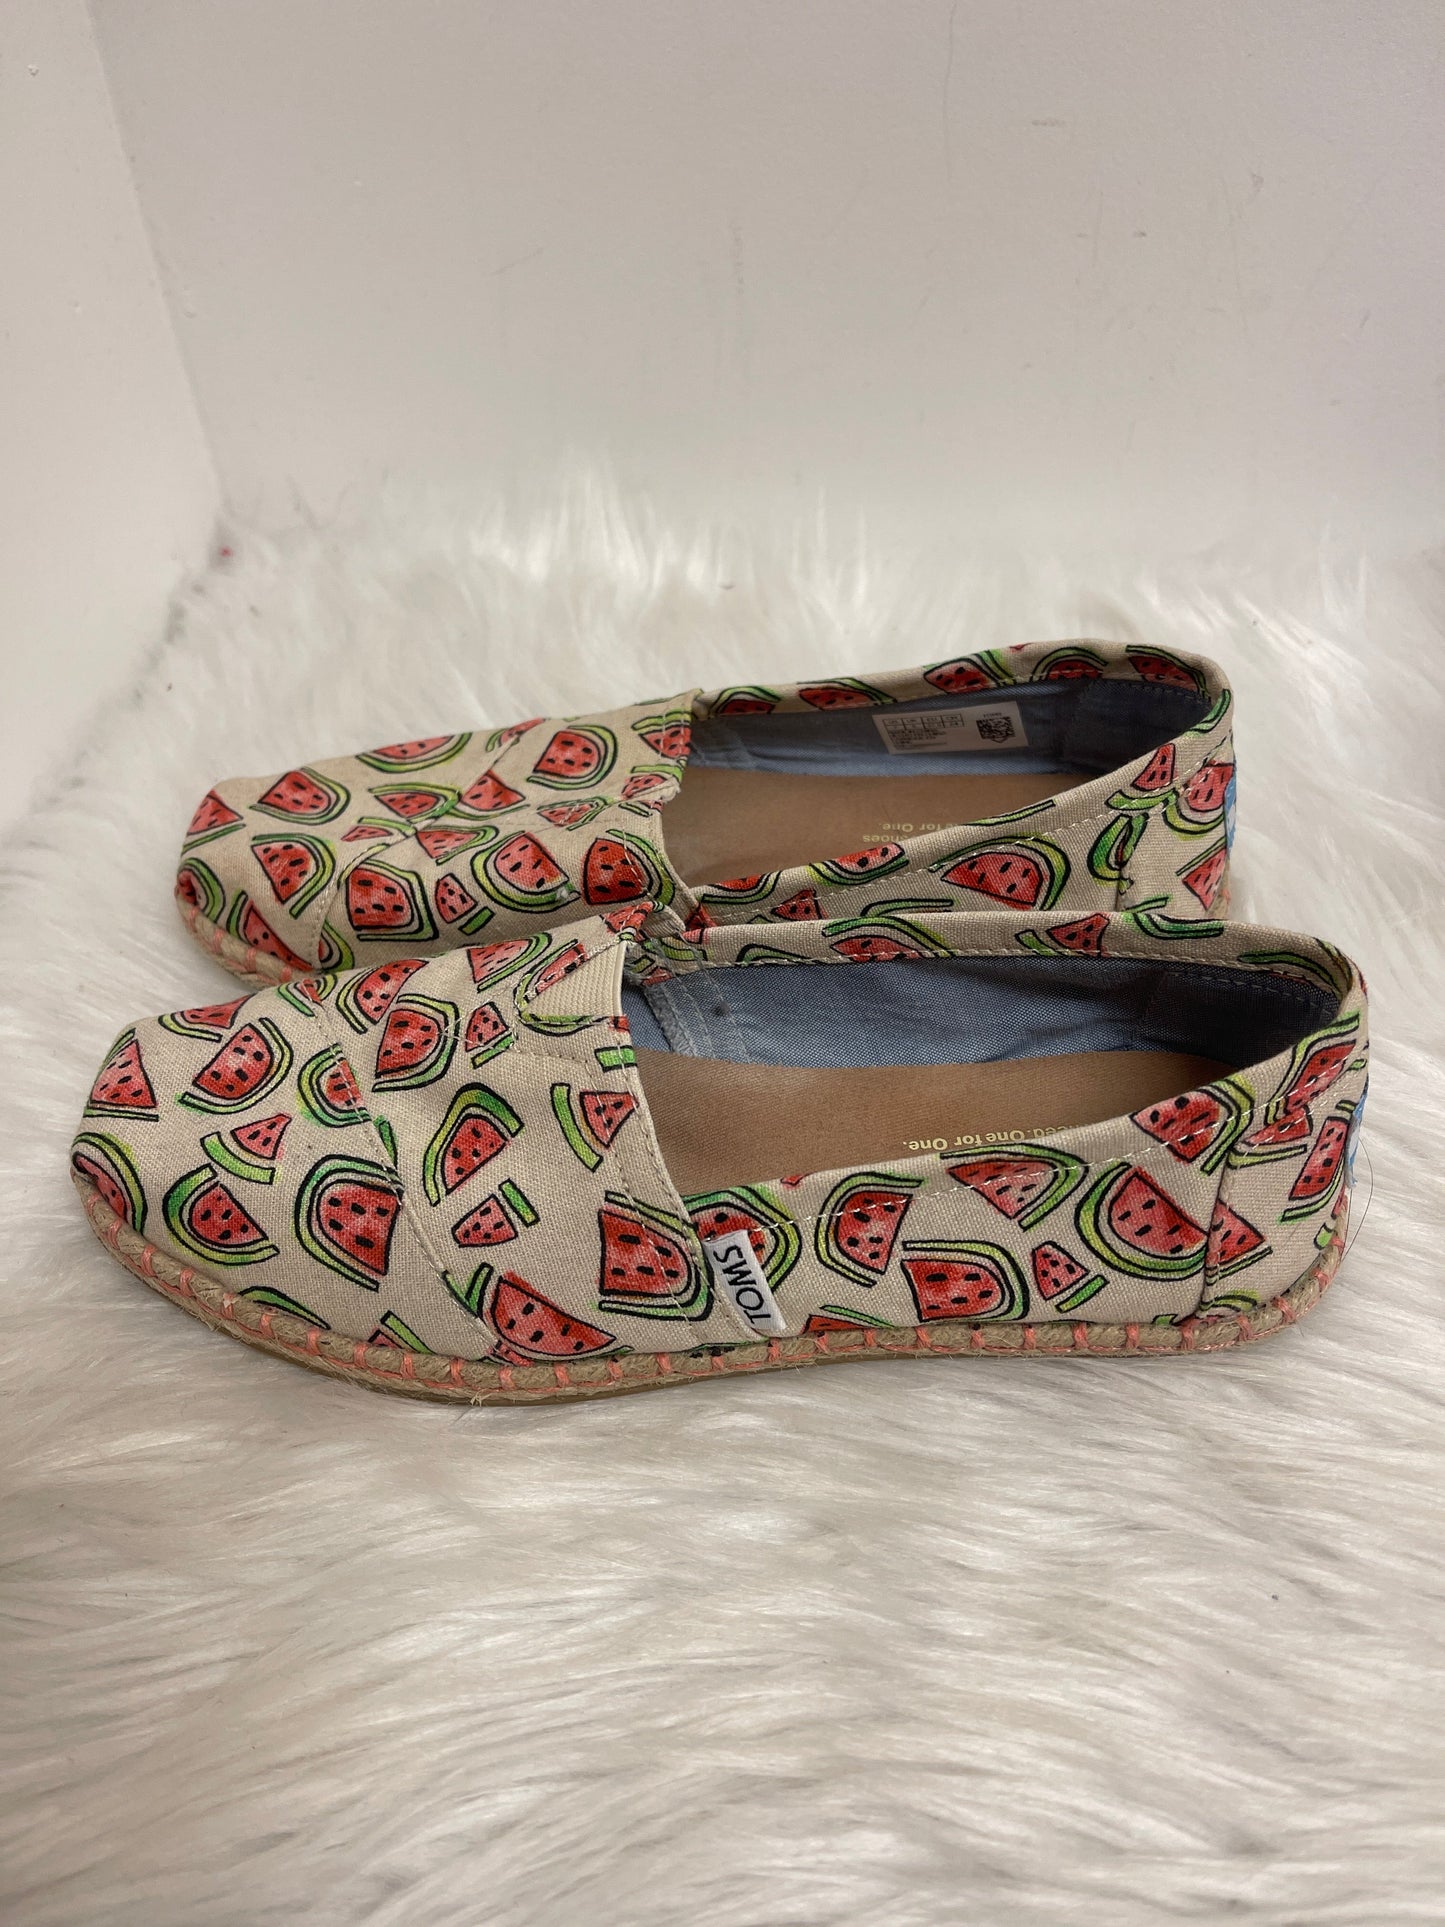 Shoes Flats Other By Toms  Size: 7